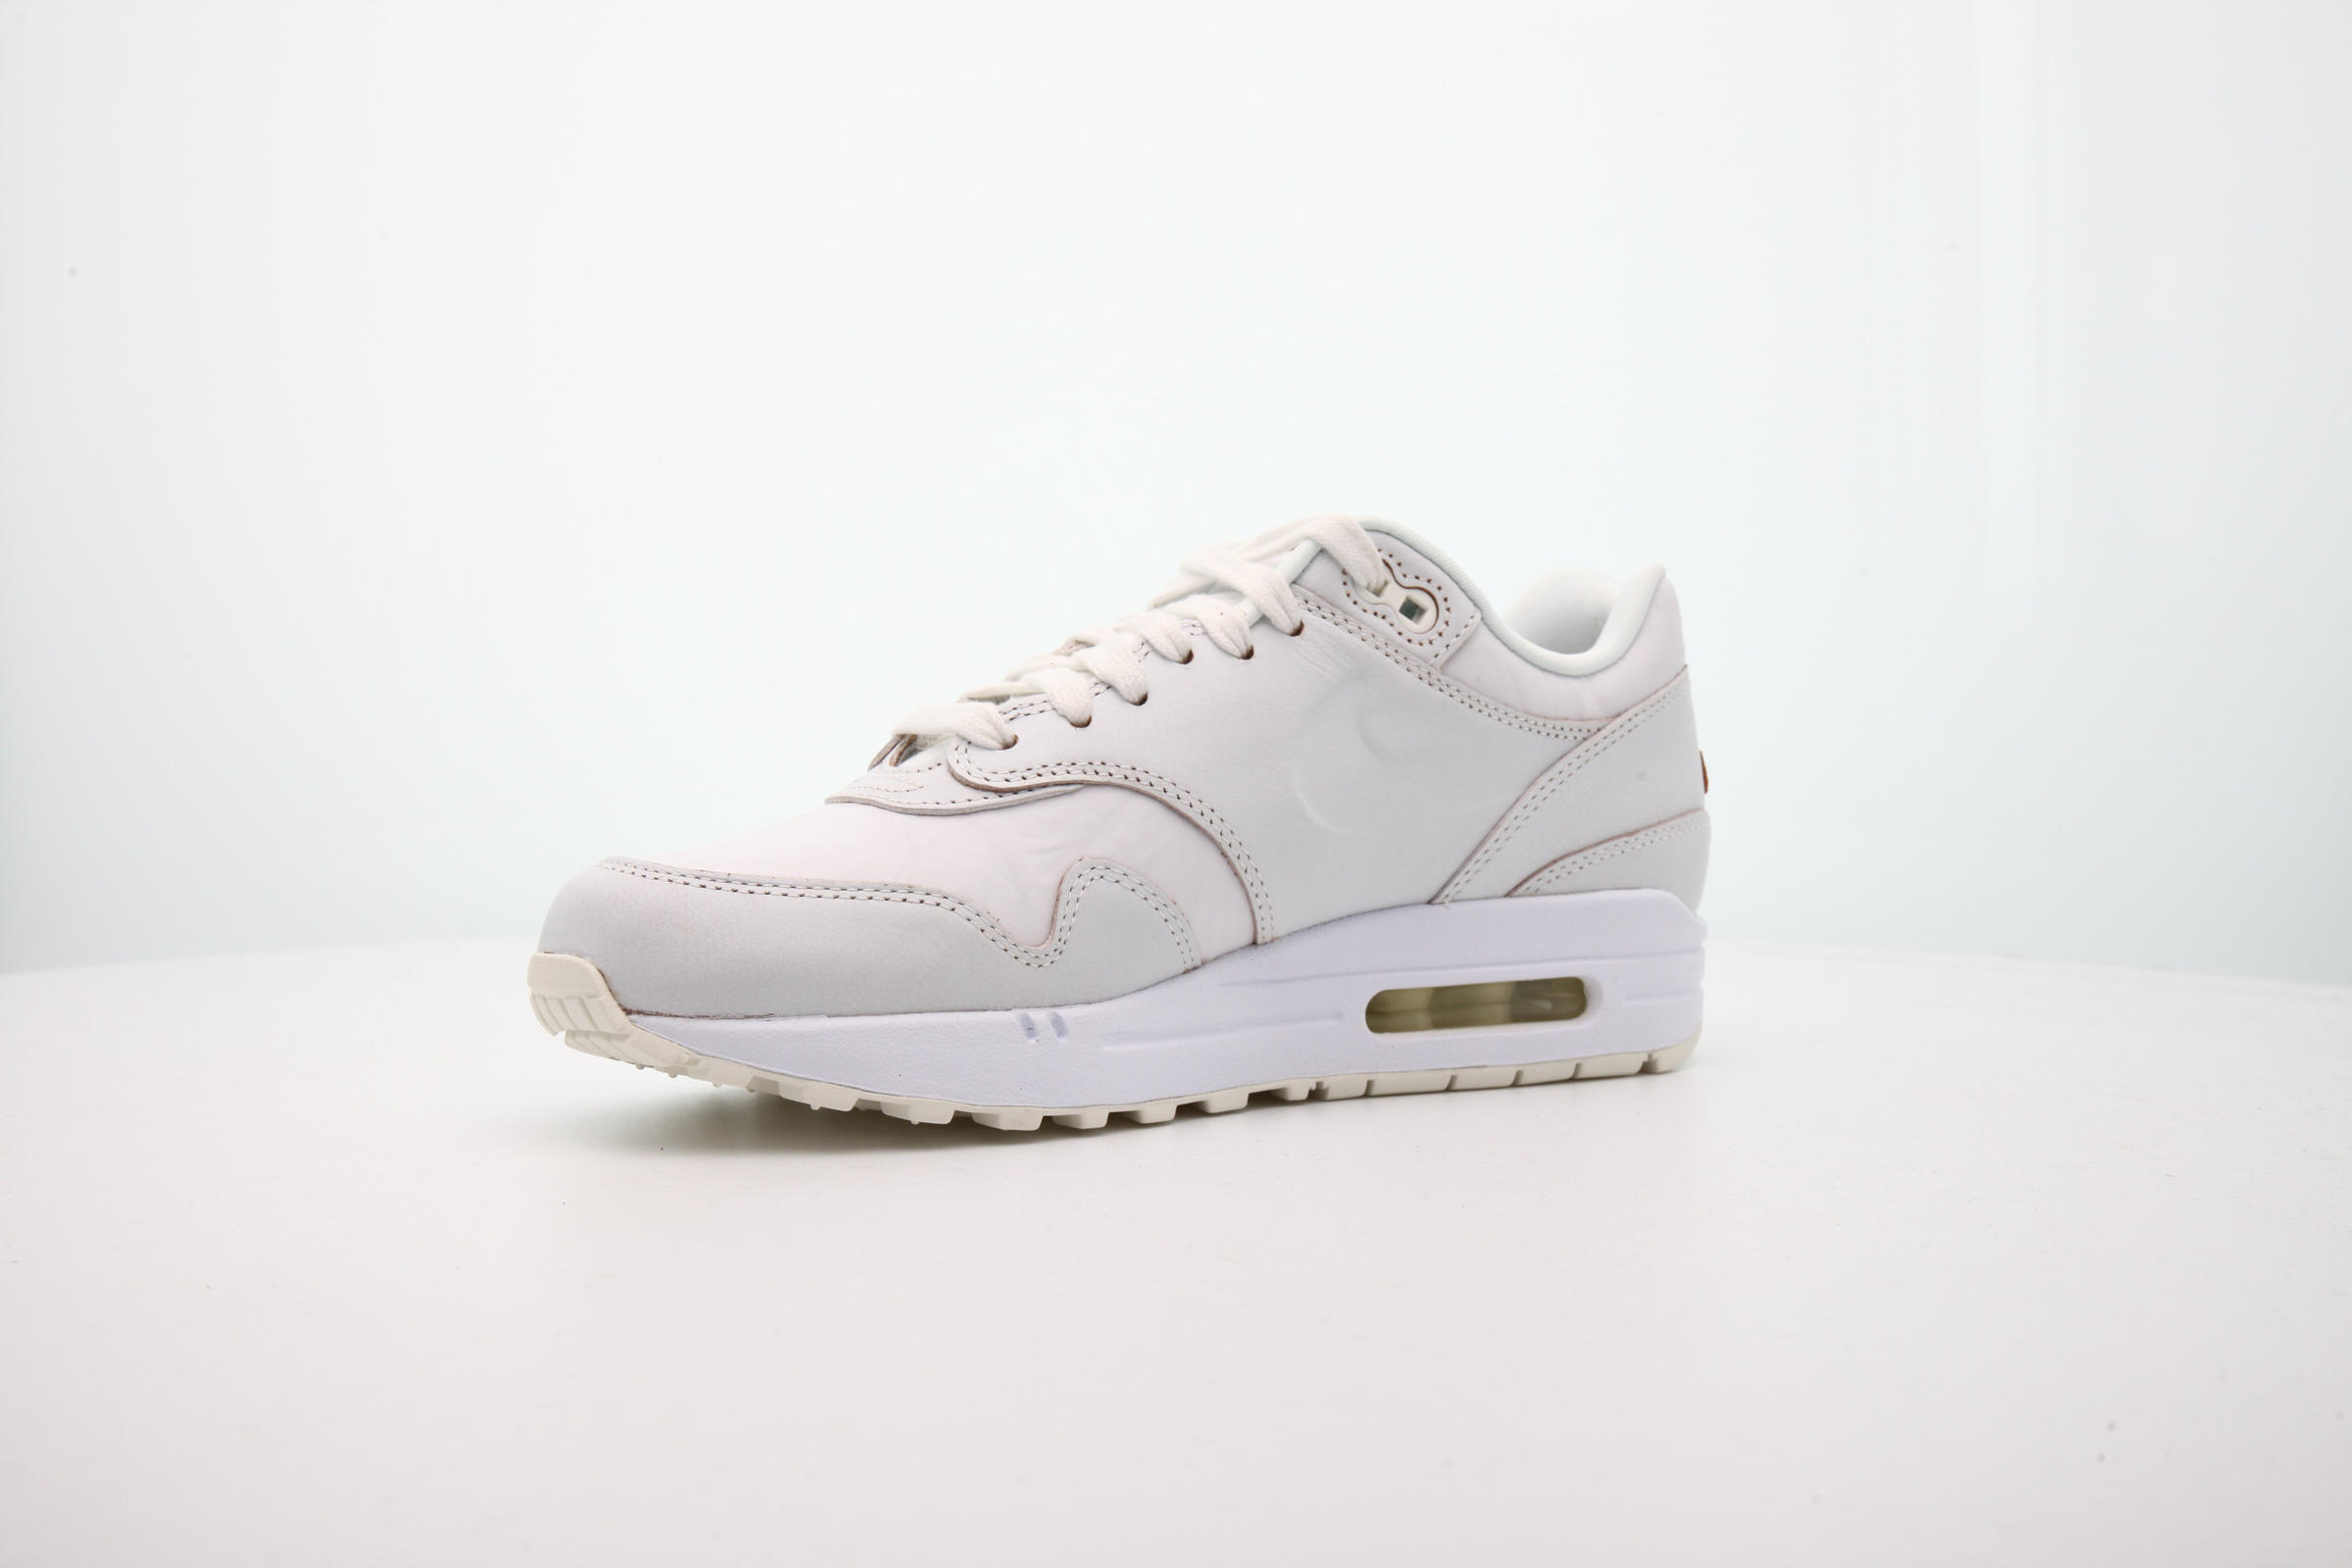 Nike WMNS AIR MAX 1 "HIS AND HERS"